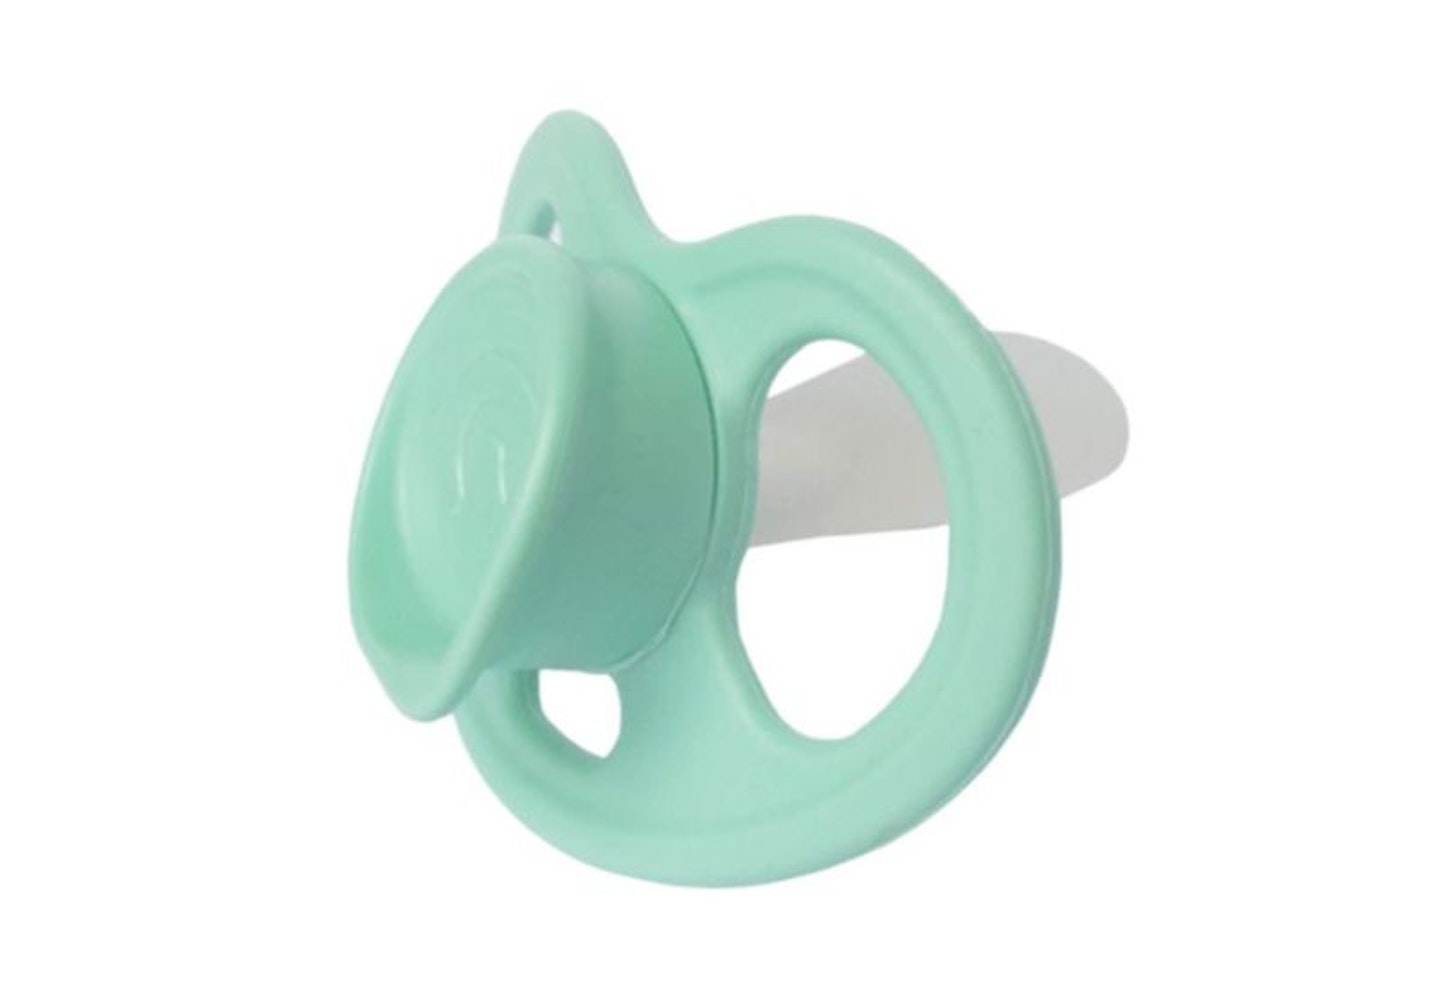 Qudo™ Soother - The World’s First Scientific Soother